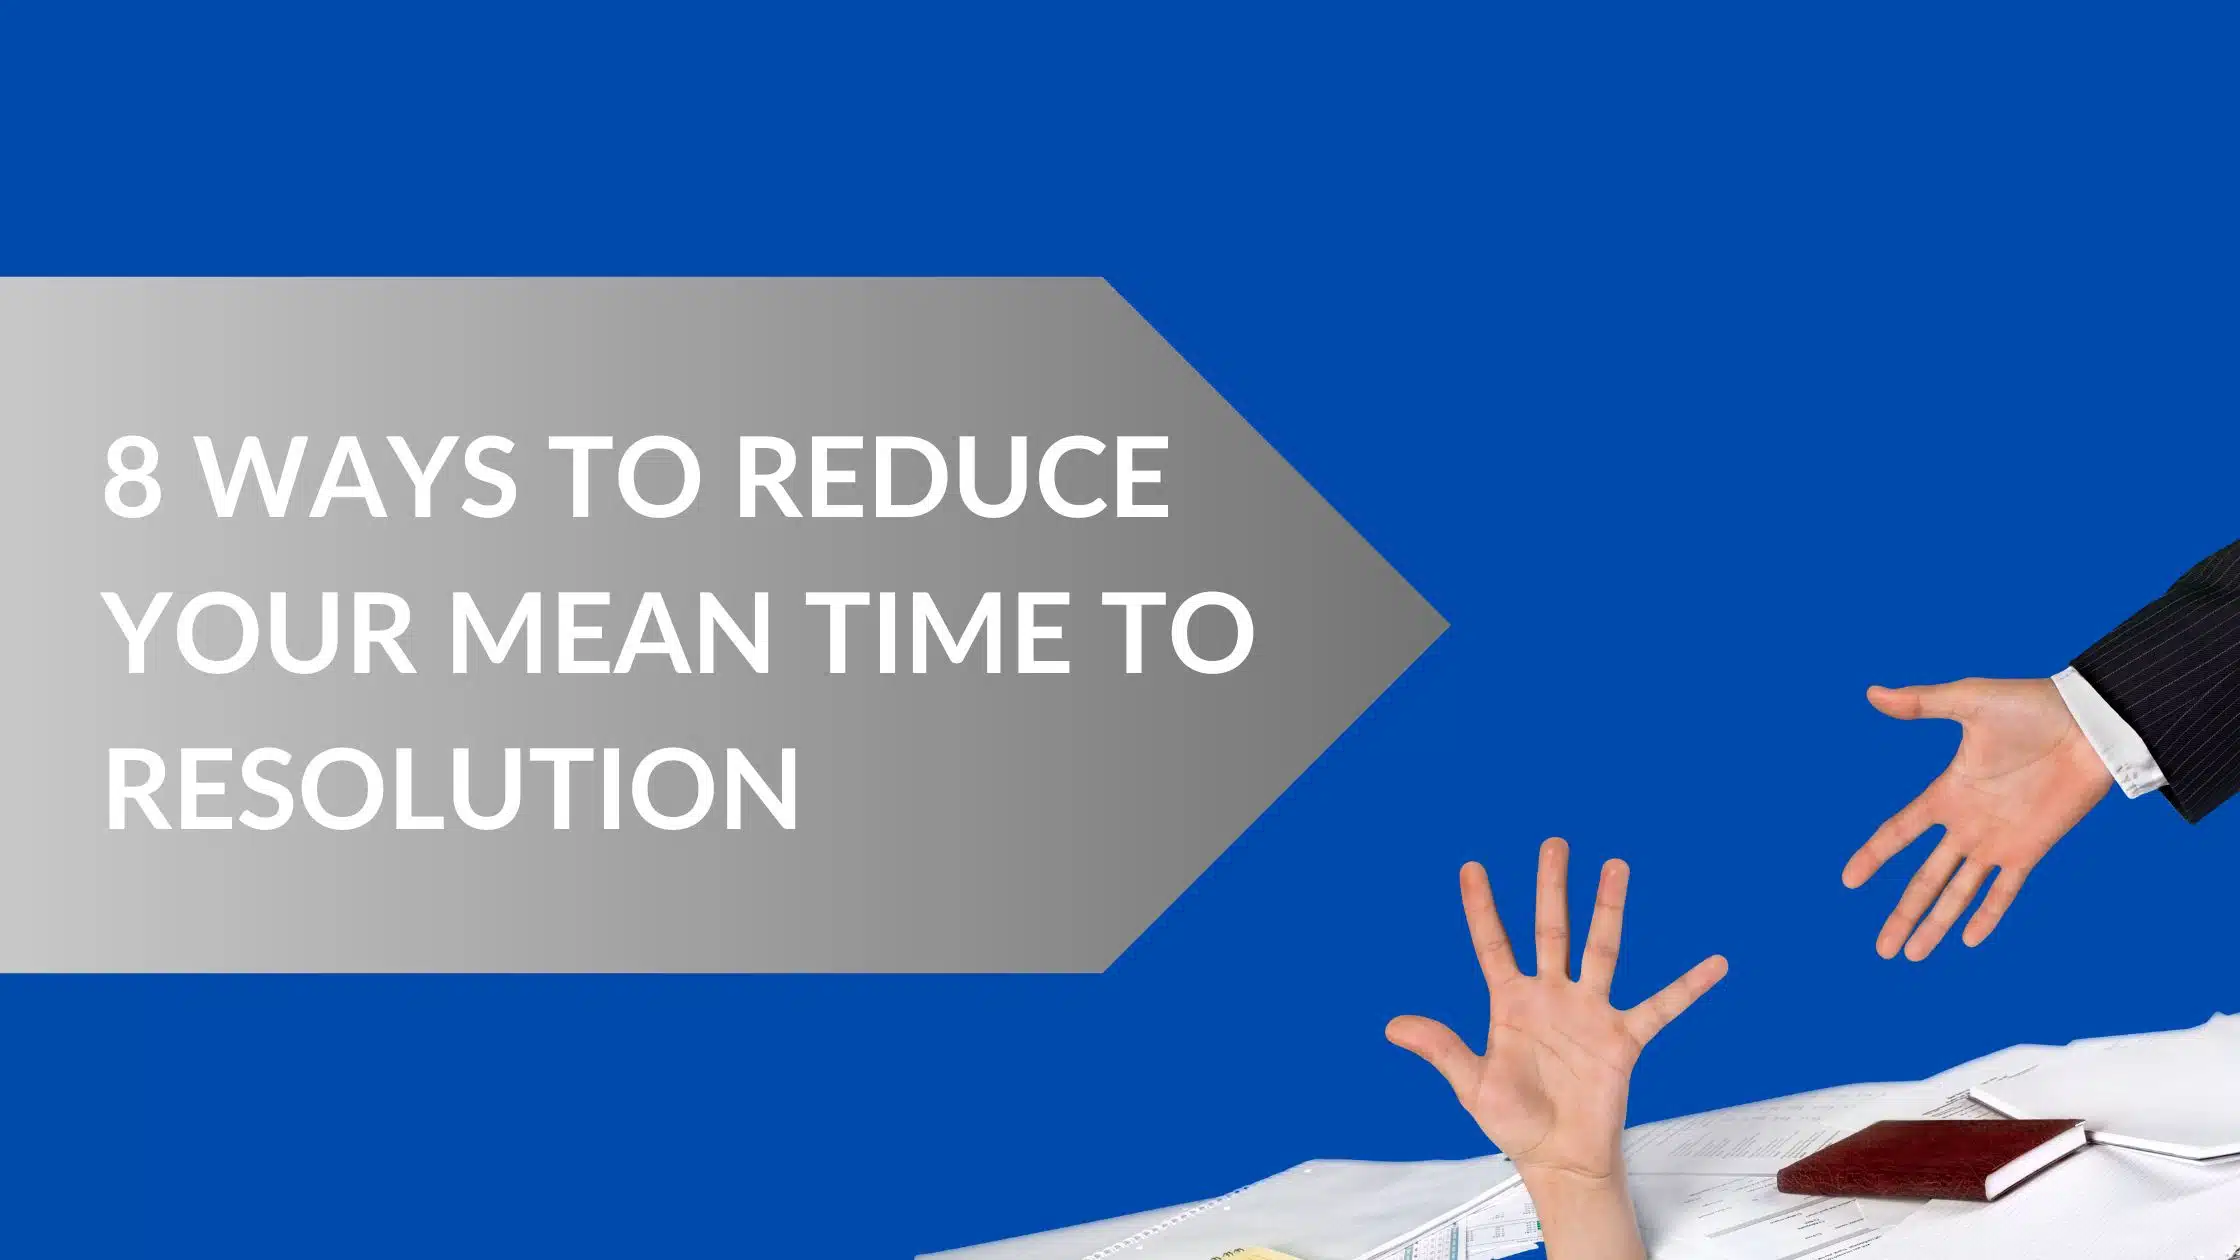 8 ways to reduce your mean time to resolution